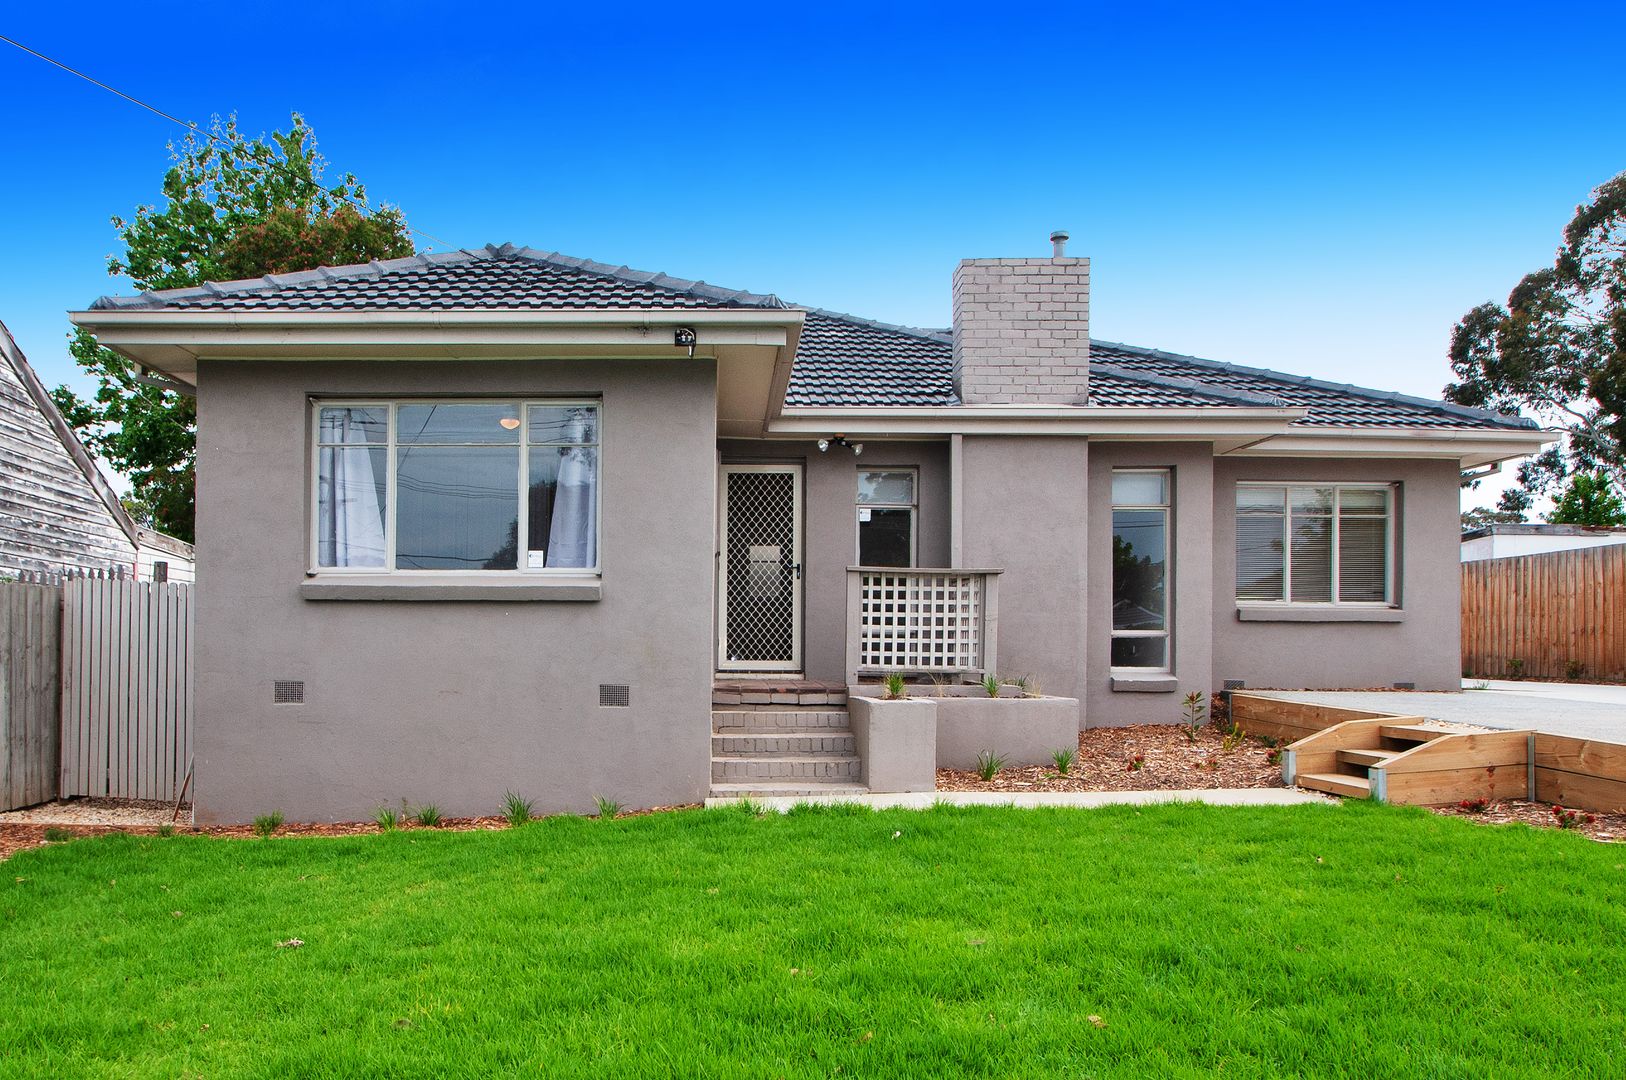 60 Exeter Road Croydon North Vic 3136 House For Rent